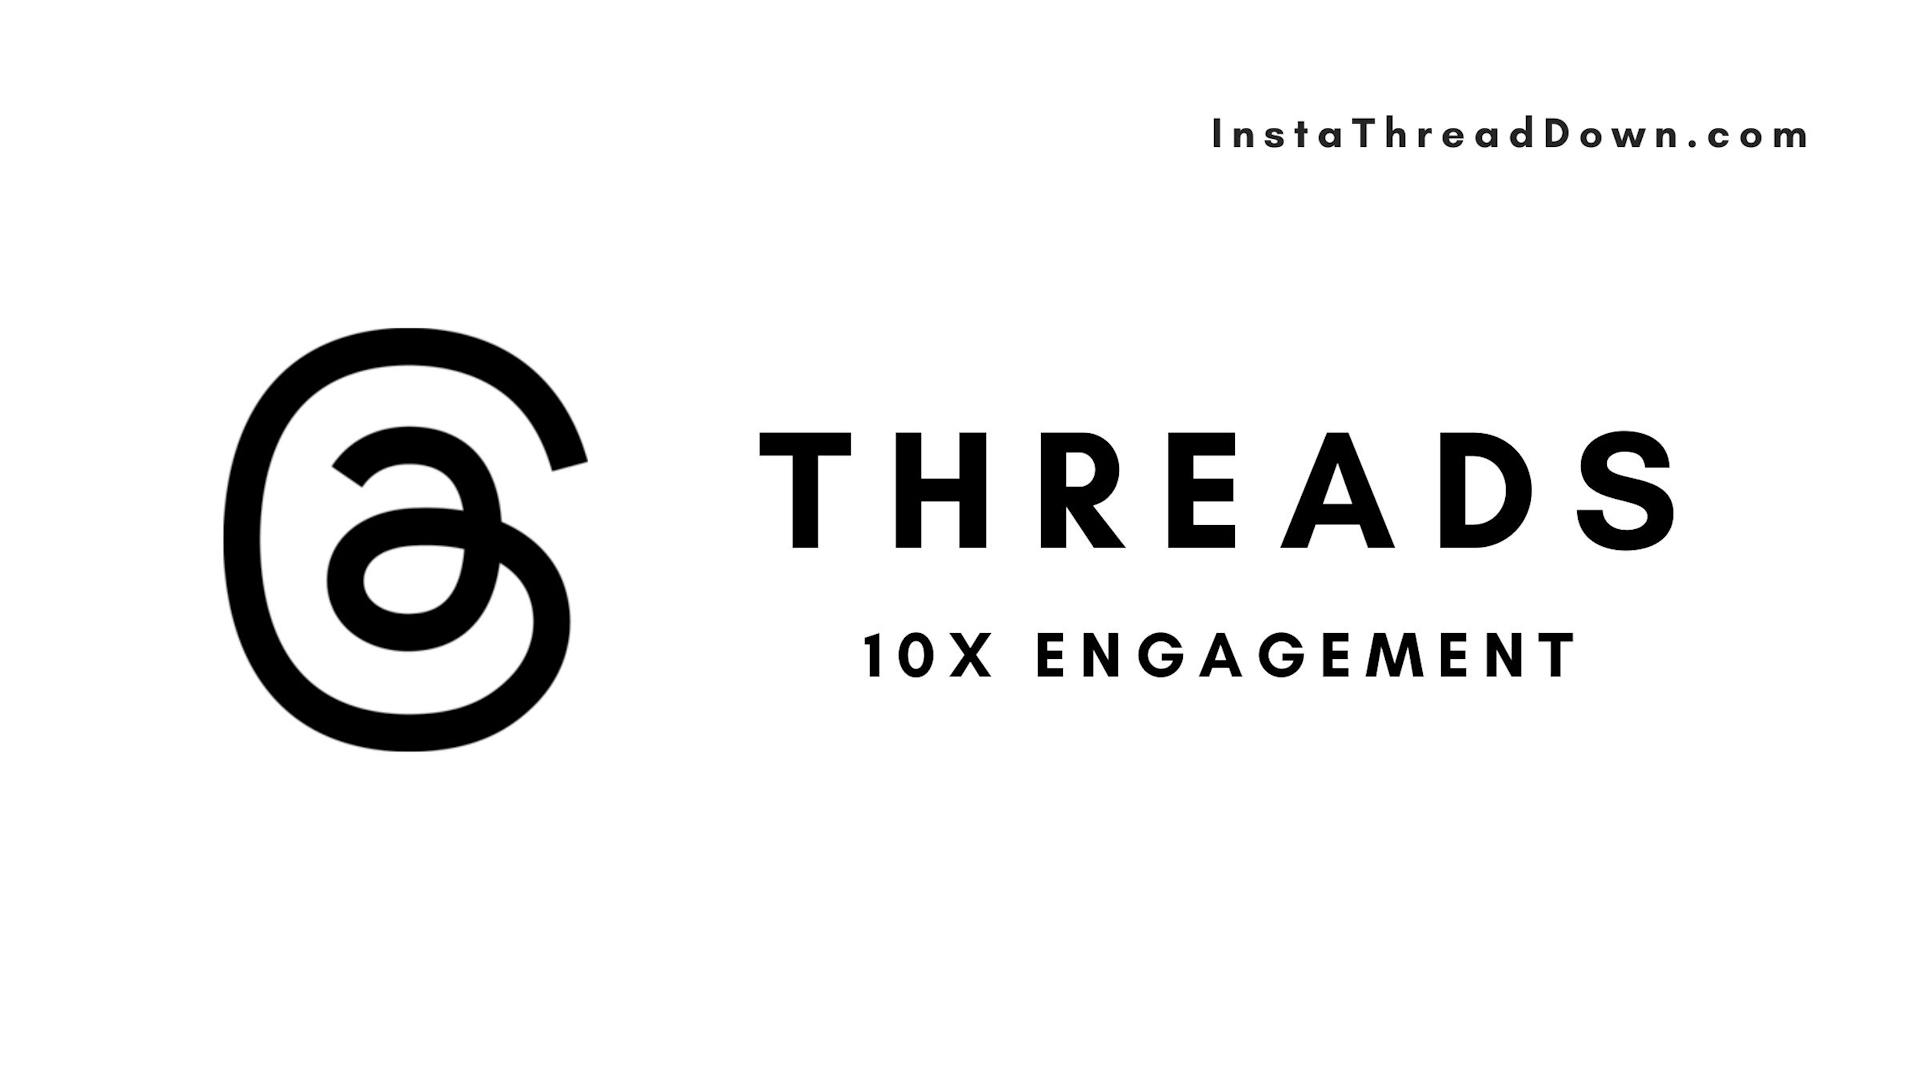 How to Make Your Threads Posts More Engaging